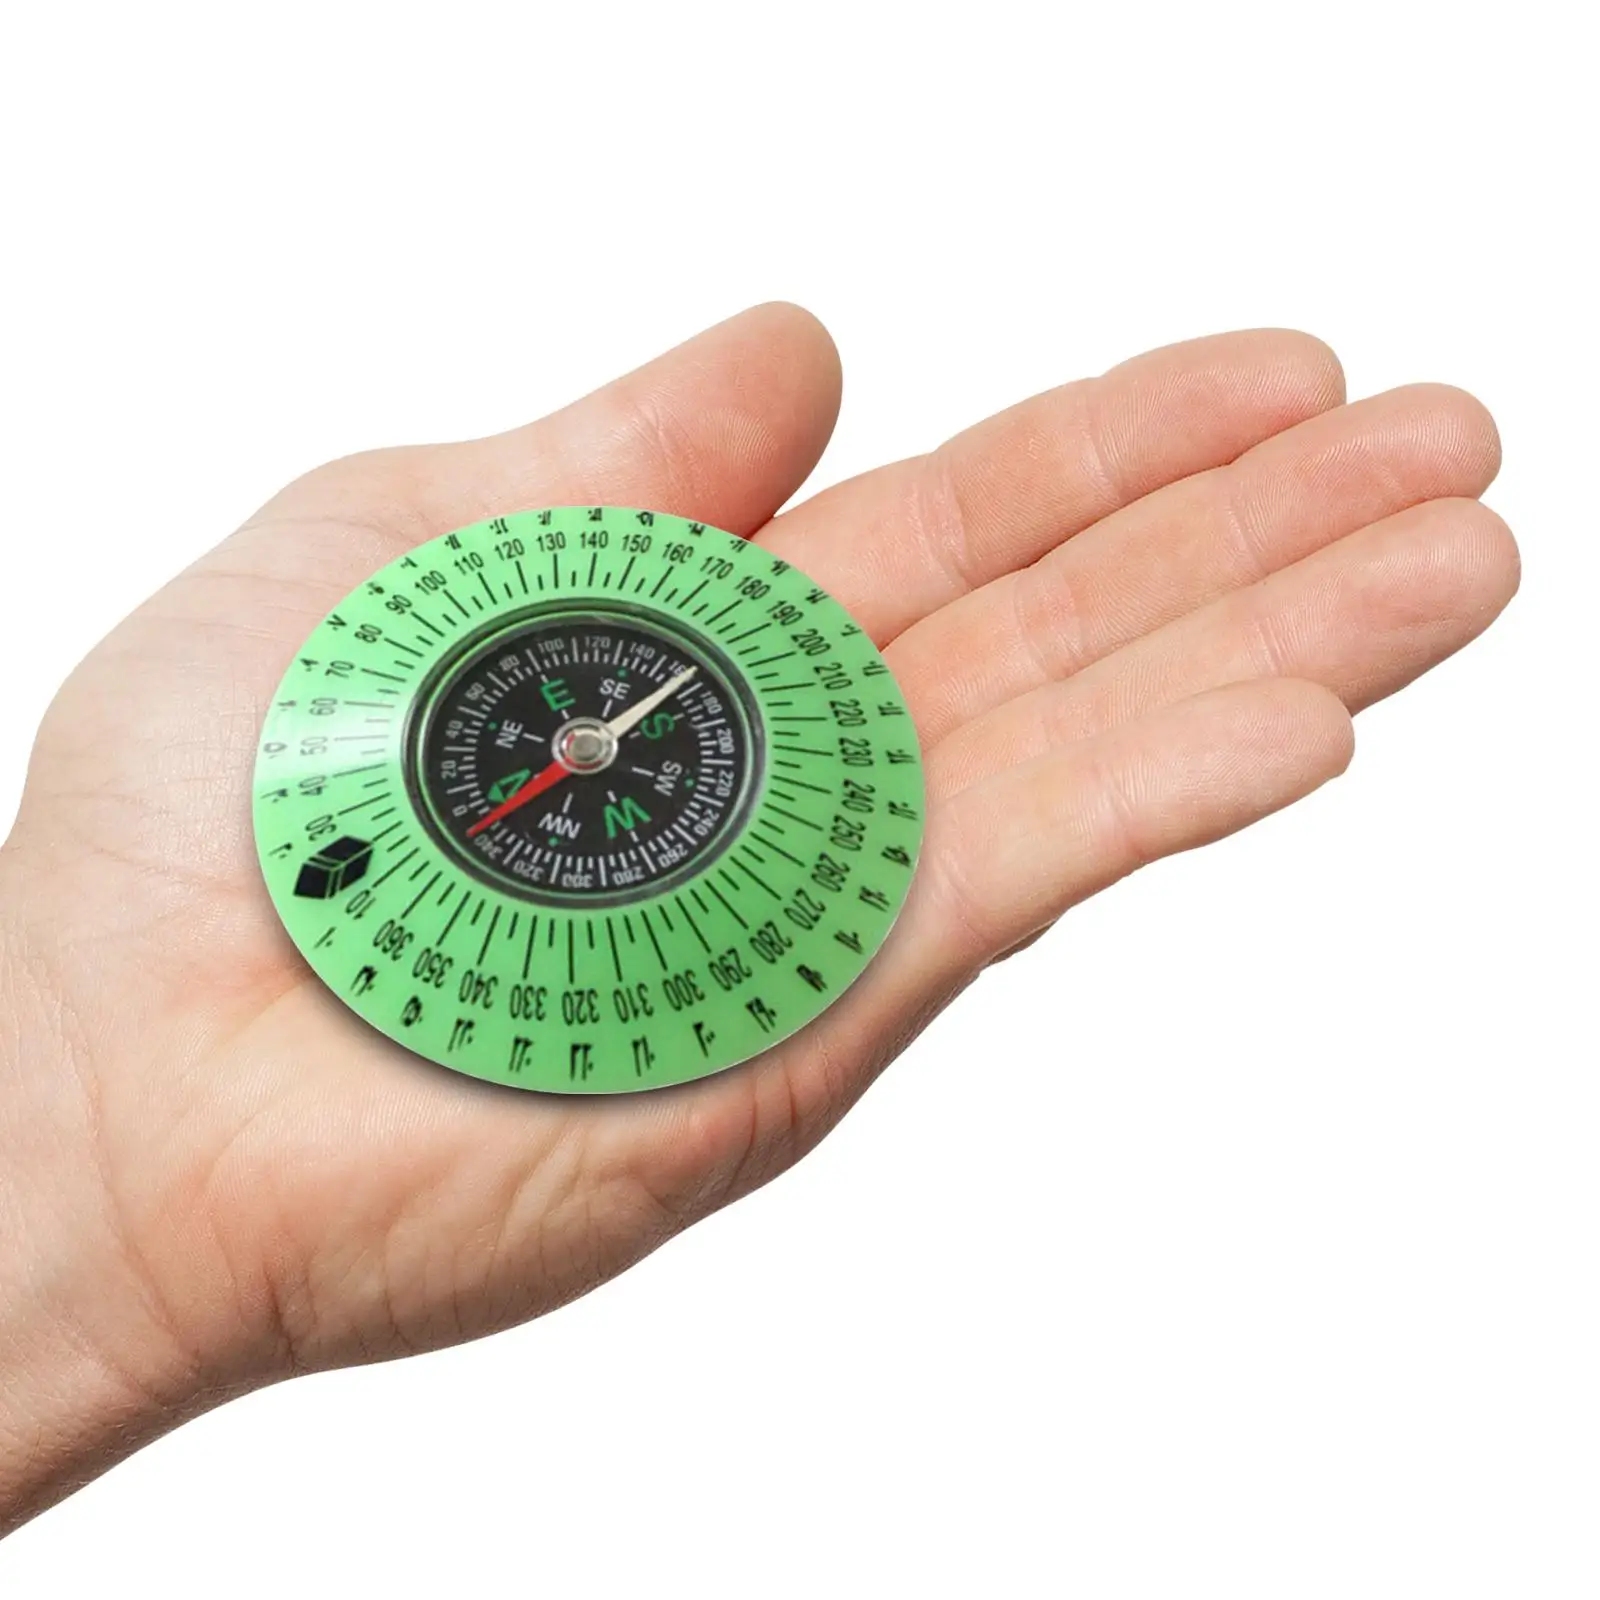 Qibla Find Compass Pocket Portable Mecca Kaaba Small Makkah Qibla Direction Compass for Hiking Outdoor Backpacking Gadget Gift